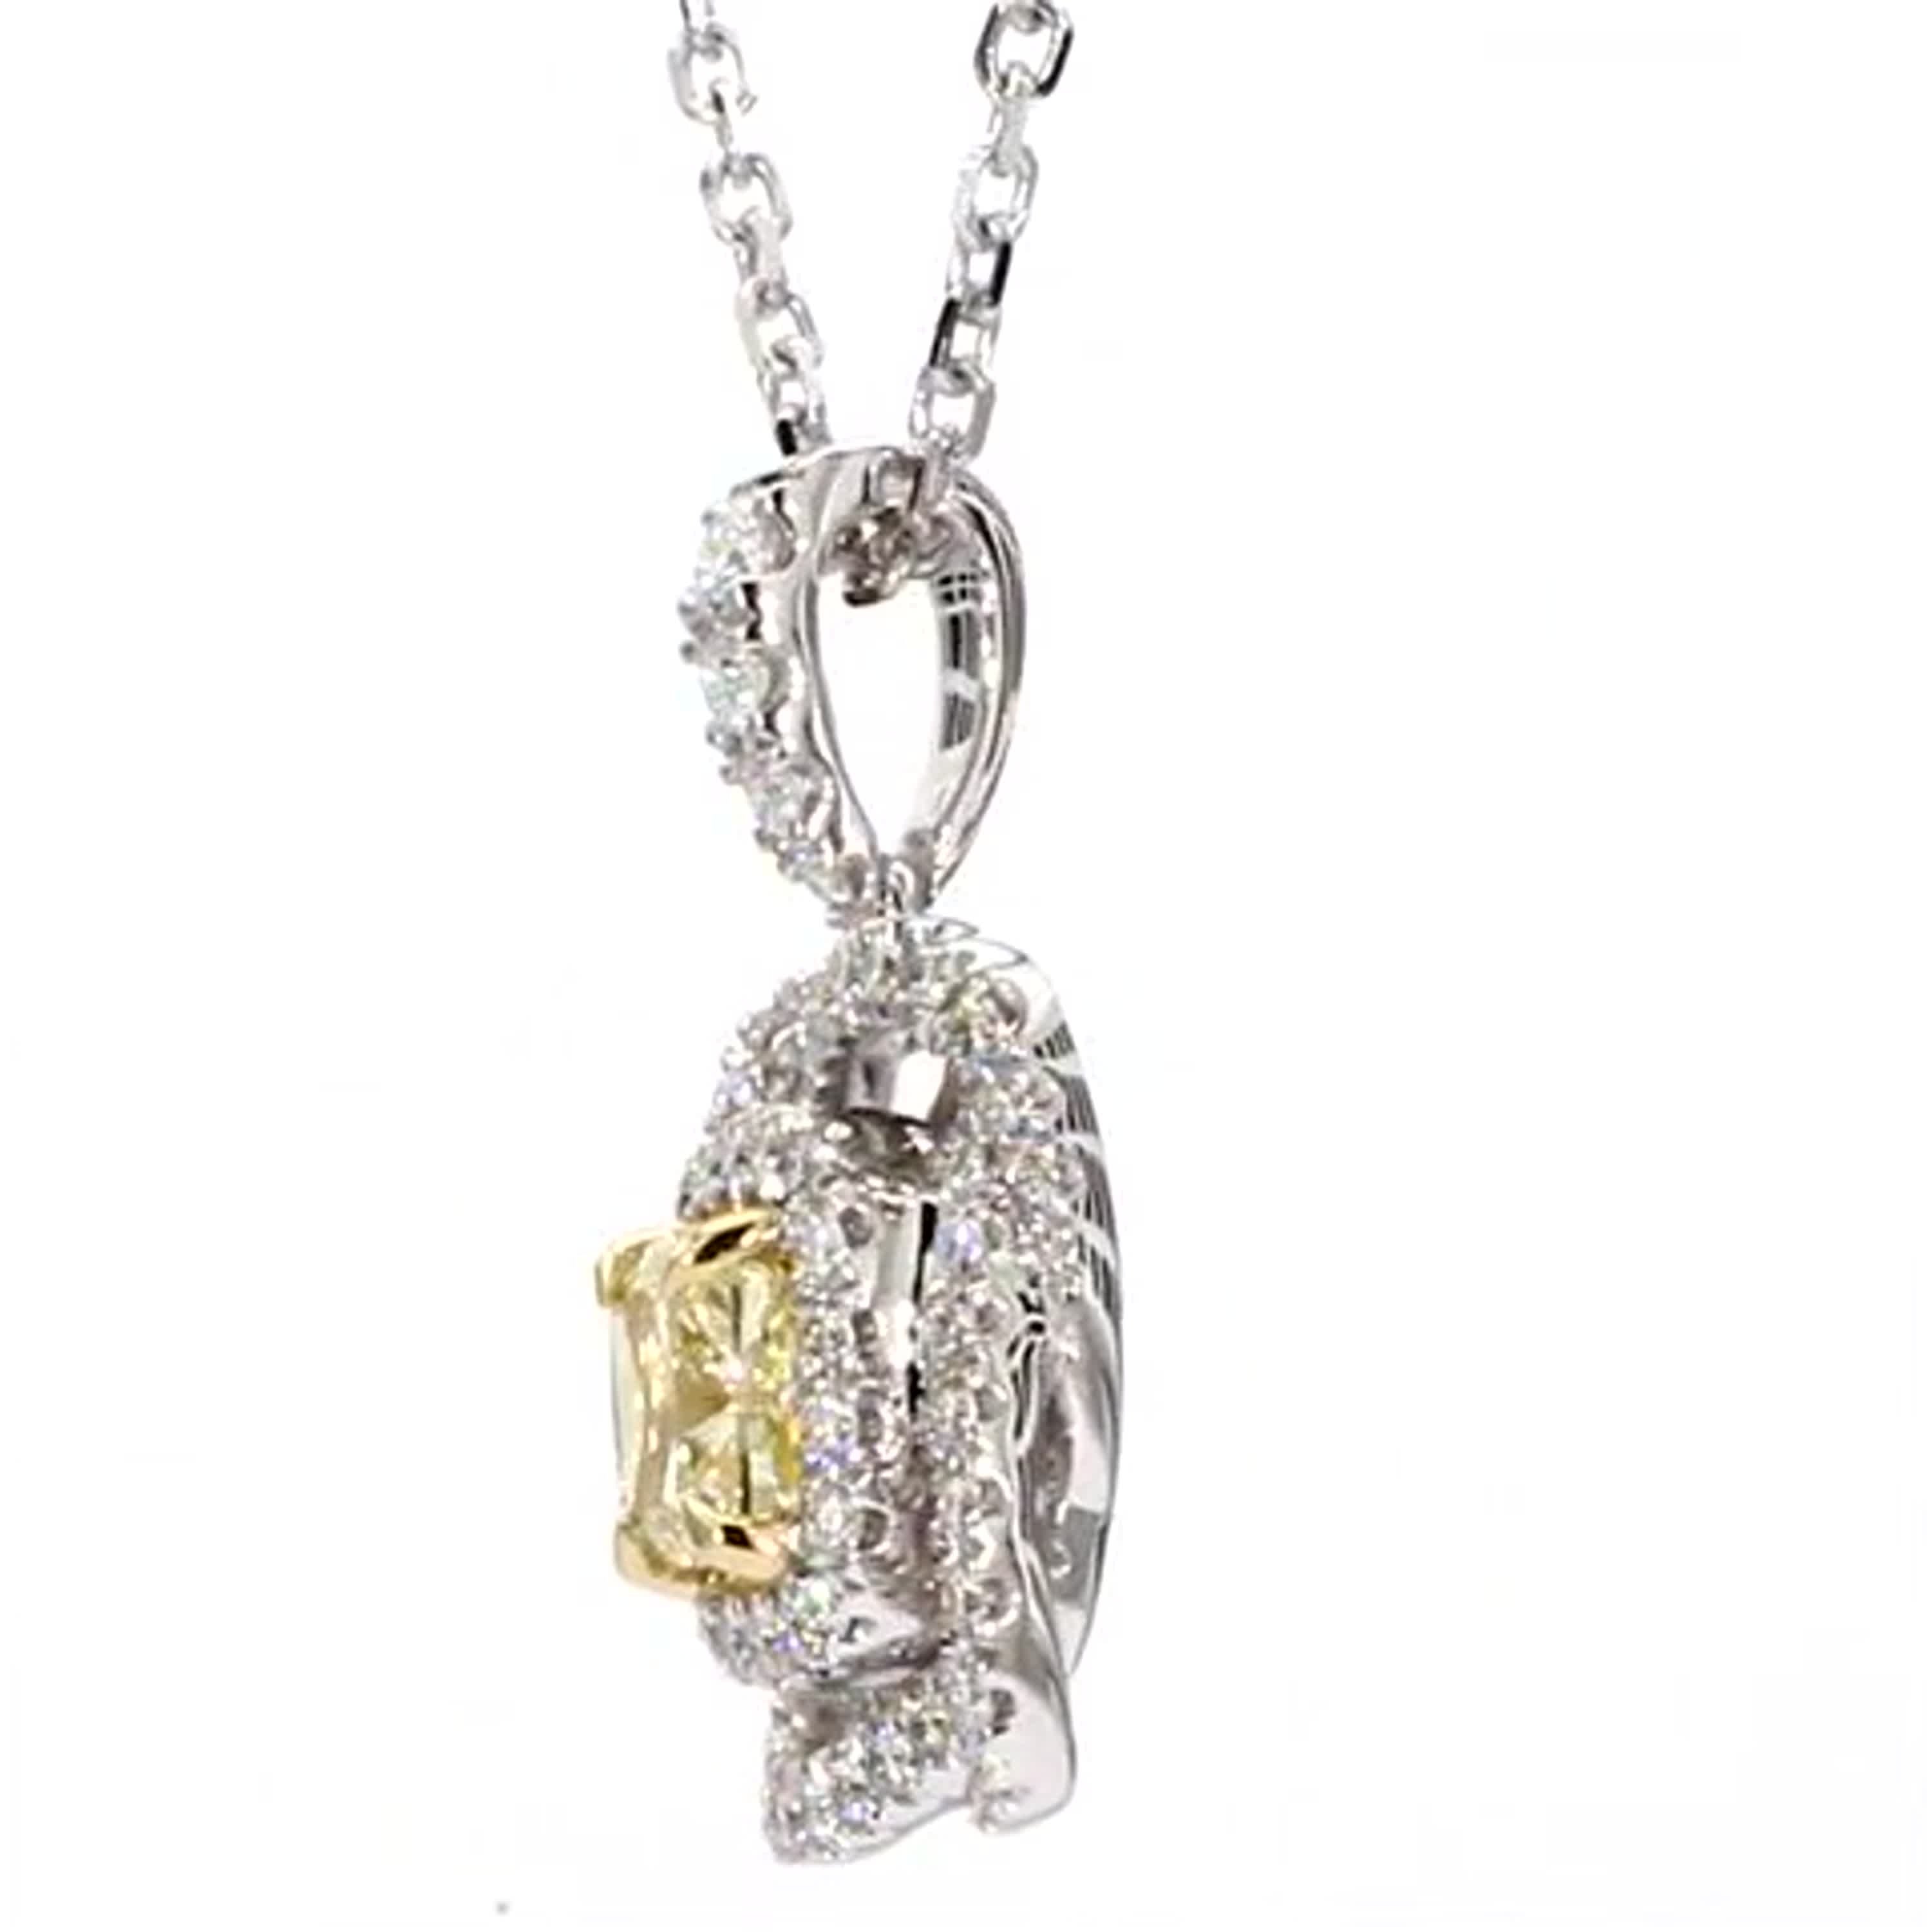 GIA Certified Natural Yellow Cushion and White Diamond 1.16 CT TW Gold Pendant